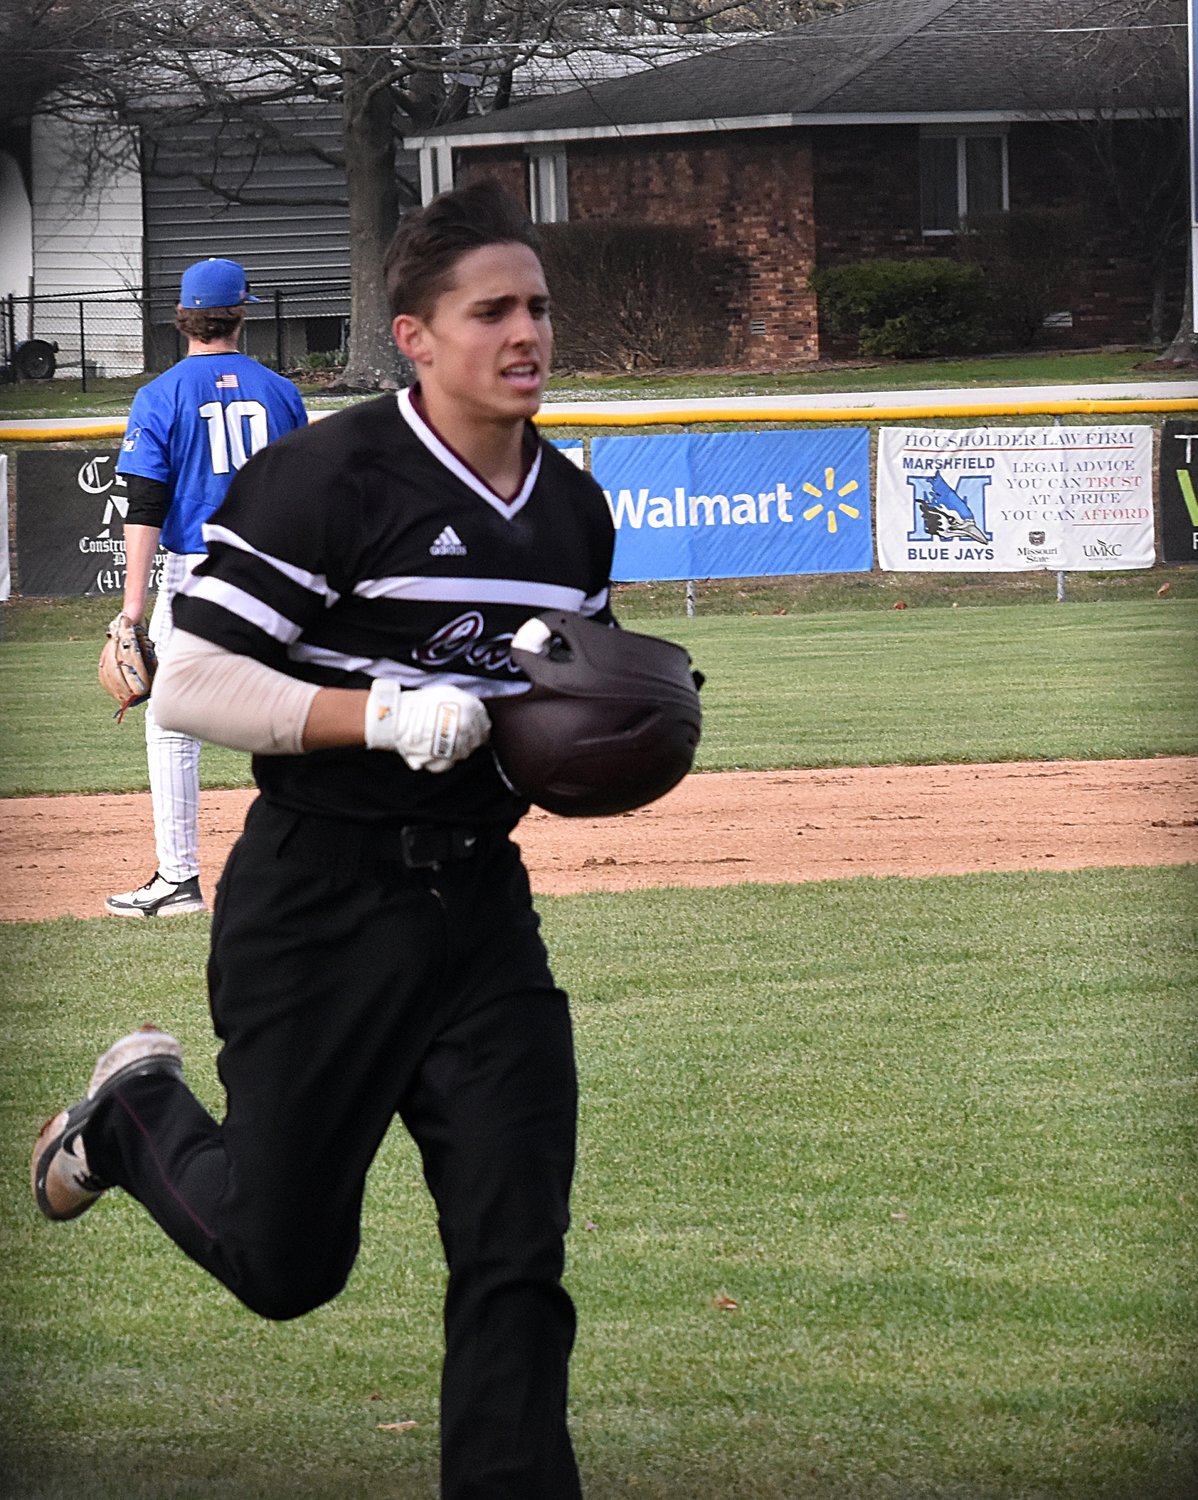 Junior Wildcat catcher Noah Carrow trots home after stroking a second-inning solo home run to start the Rogersville scoring. Carrow also took the mound in the seventh inning to close out the Wildcat shutout win.